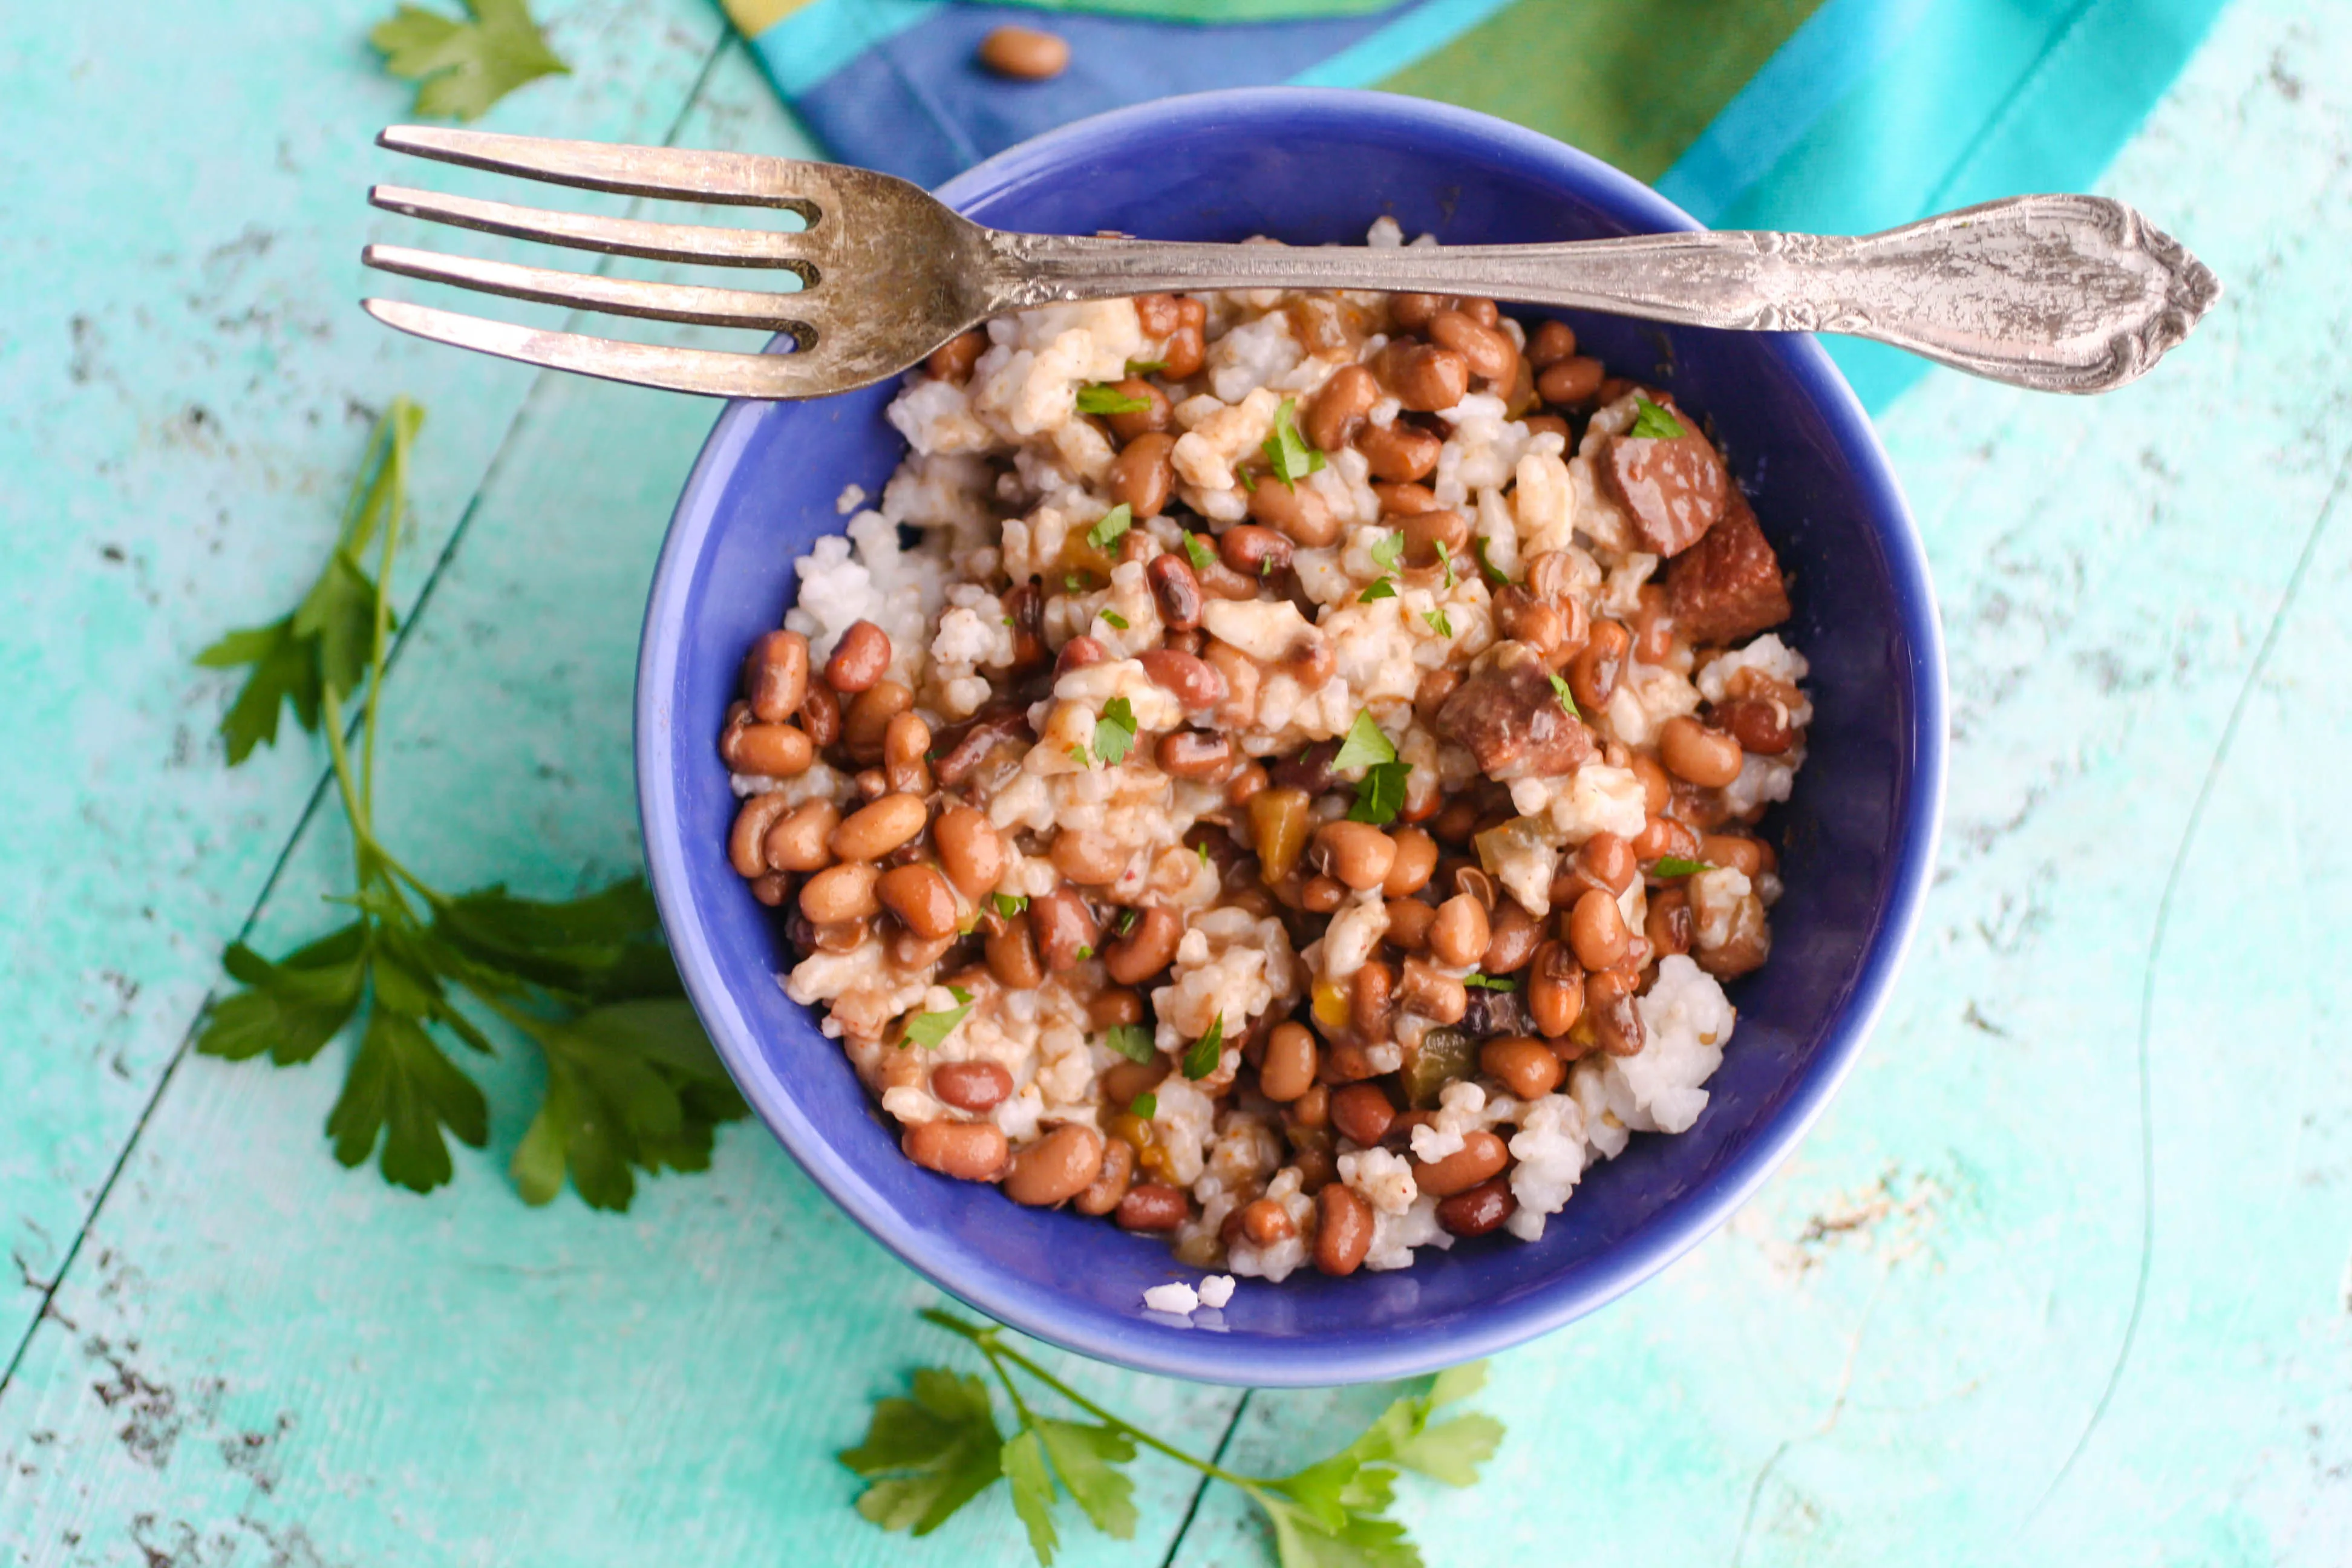 Sausage, Beans, and Rice is a simple dish that is a Southern classic. You'll love that it's both filling and flavorful.